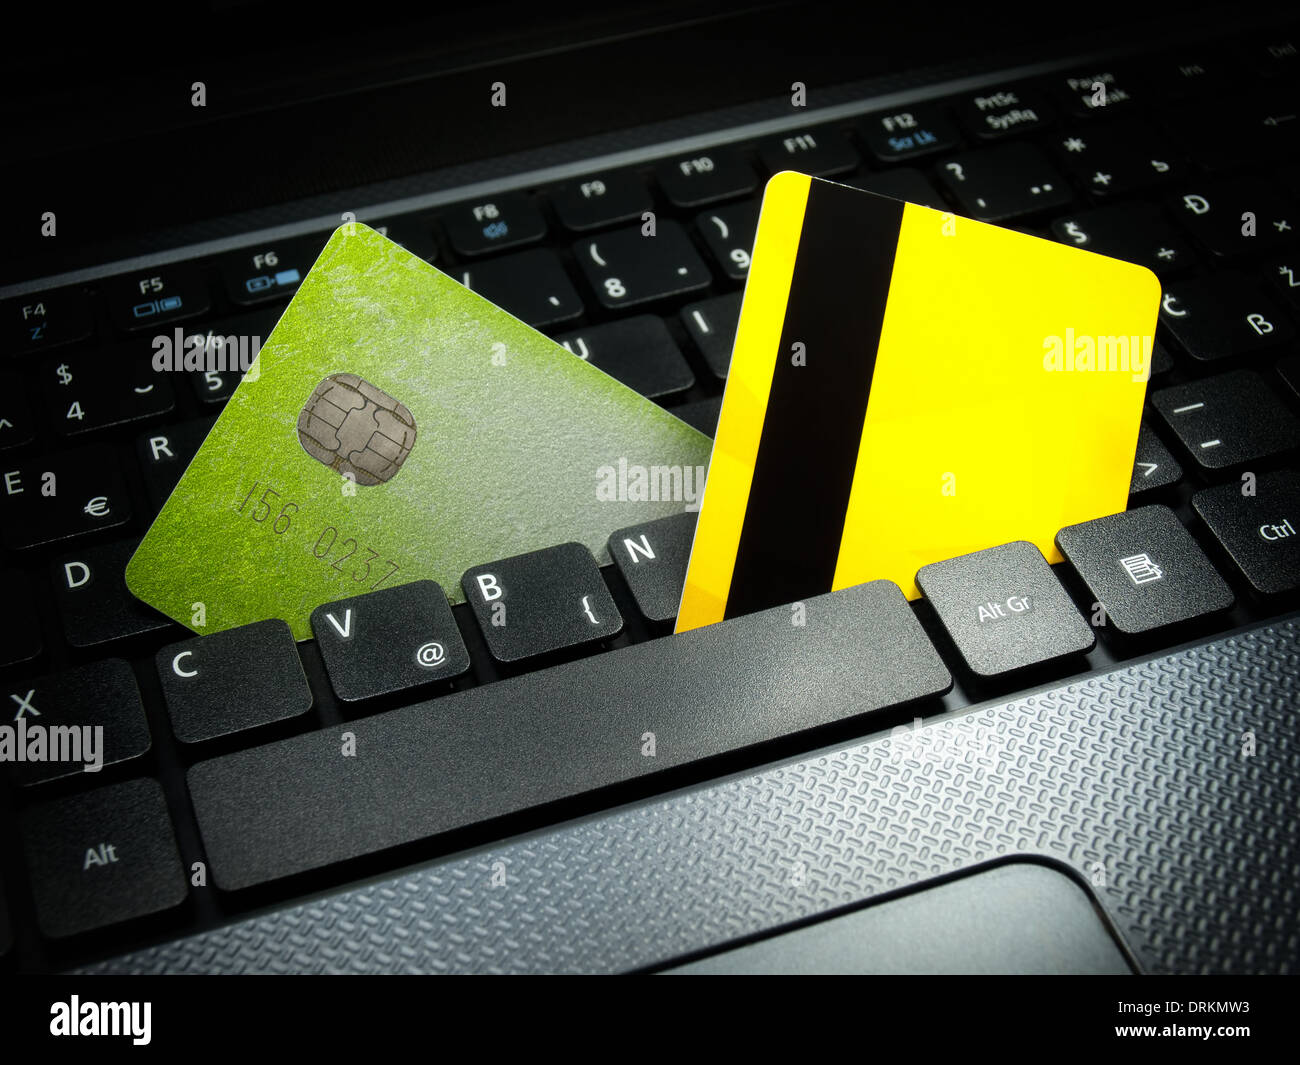 Two credit cards on the computer keyboard symbolizing payments over the internet. Stock Photo